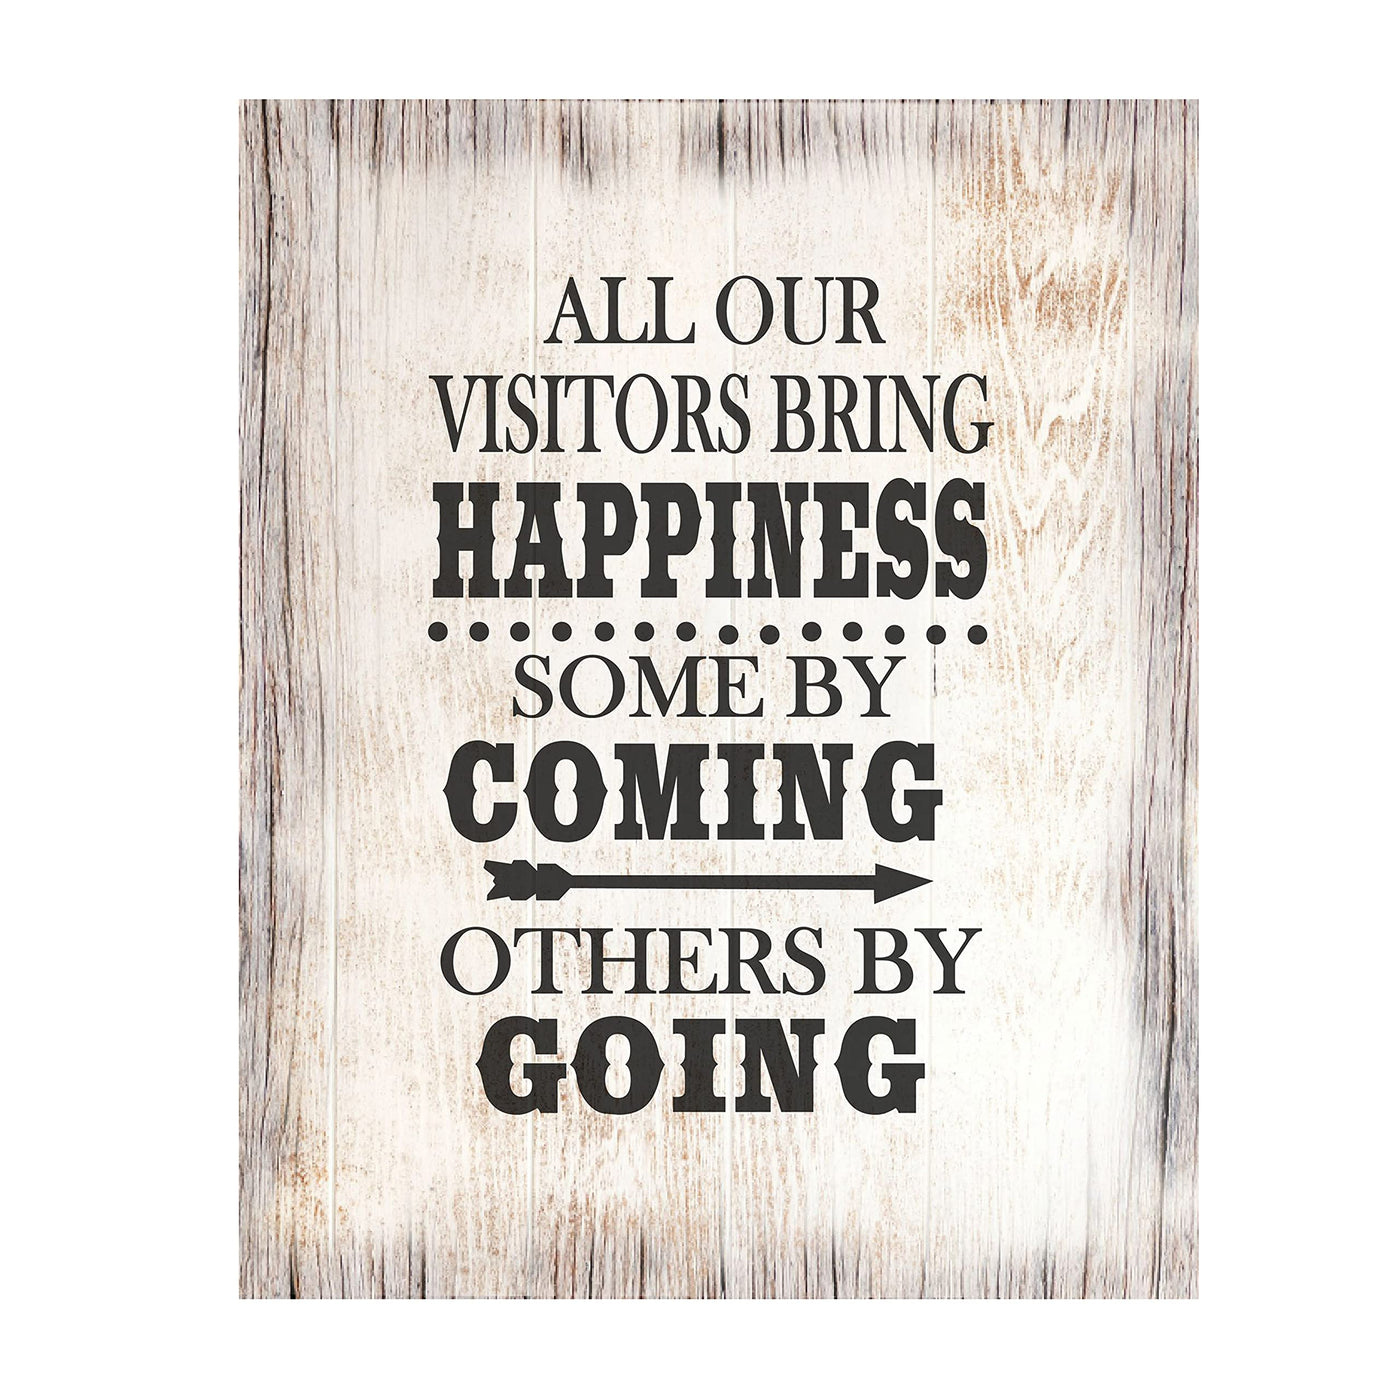 All Our Visitors Bring Happiness-Coming or Going-Funny Wall Art Sign. 8 x 10 Wall Decor Print-Ready To Frame. Typographic Wood Grain Design. Humorous Decor for Home-Office-Restaurant. Perfect Gift.